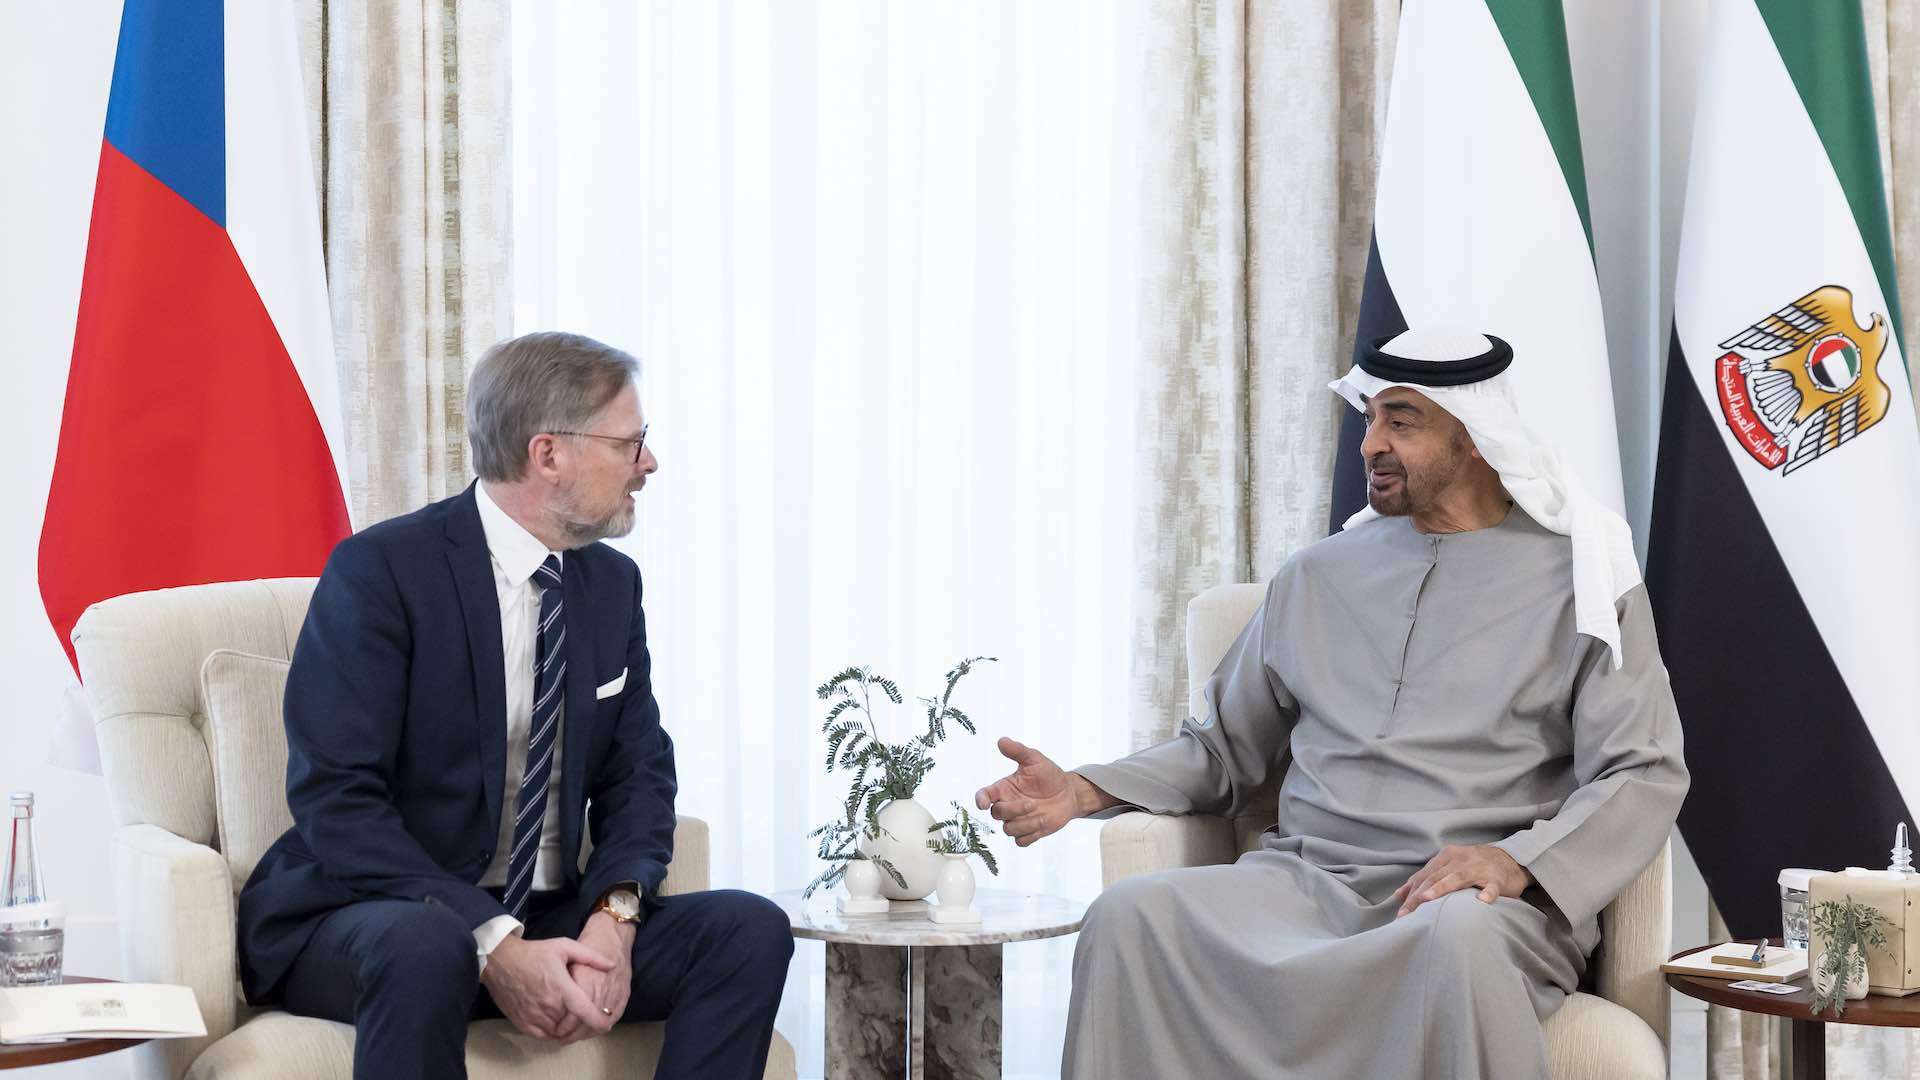 President of UAE receives Prime Minister of Czech Republic